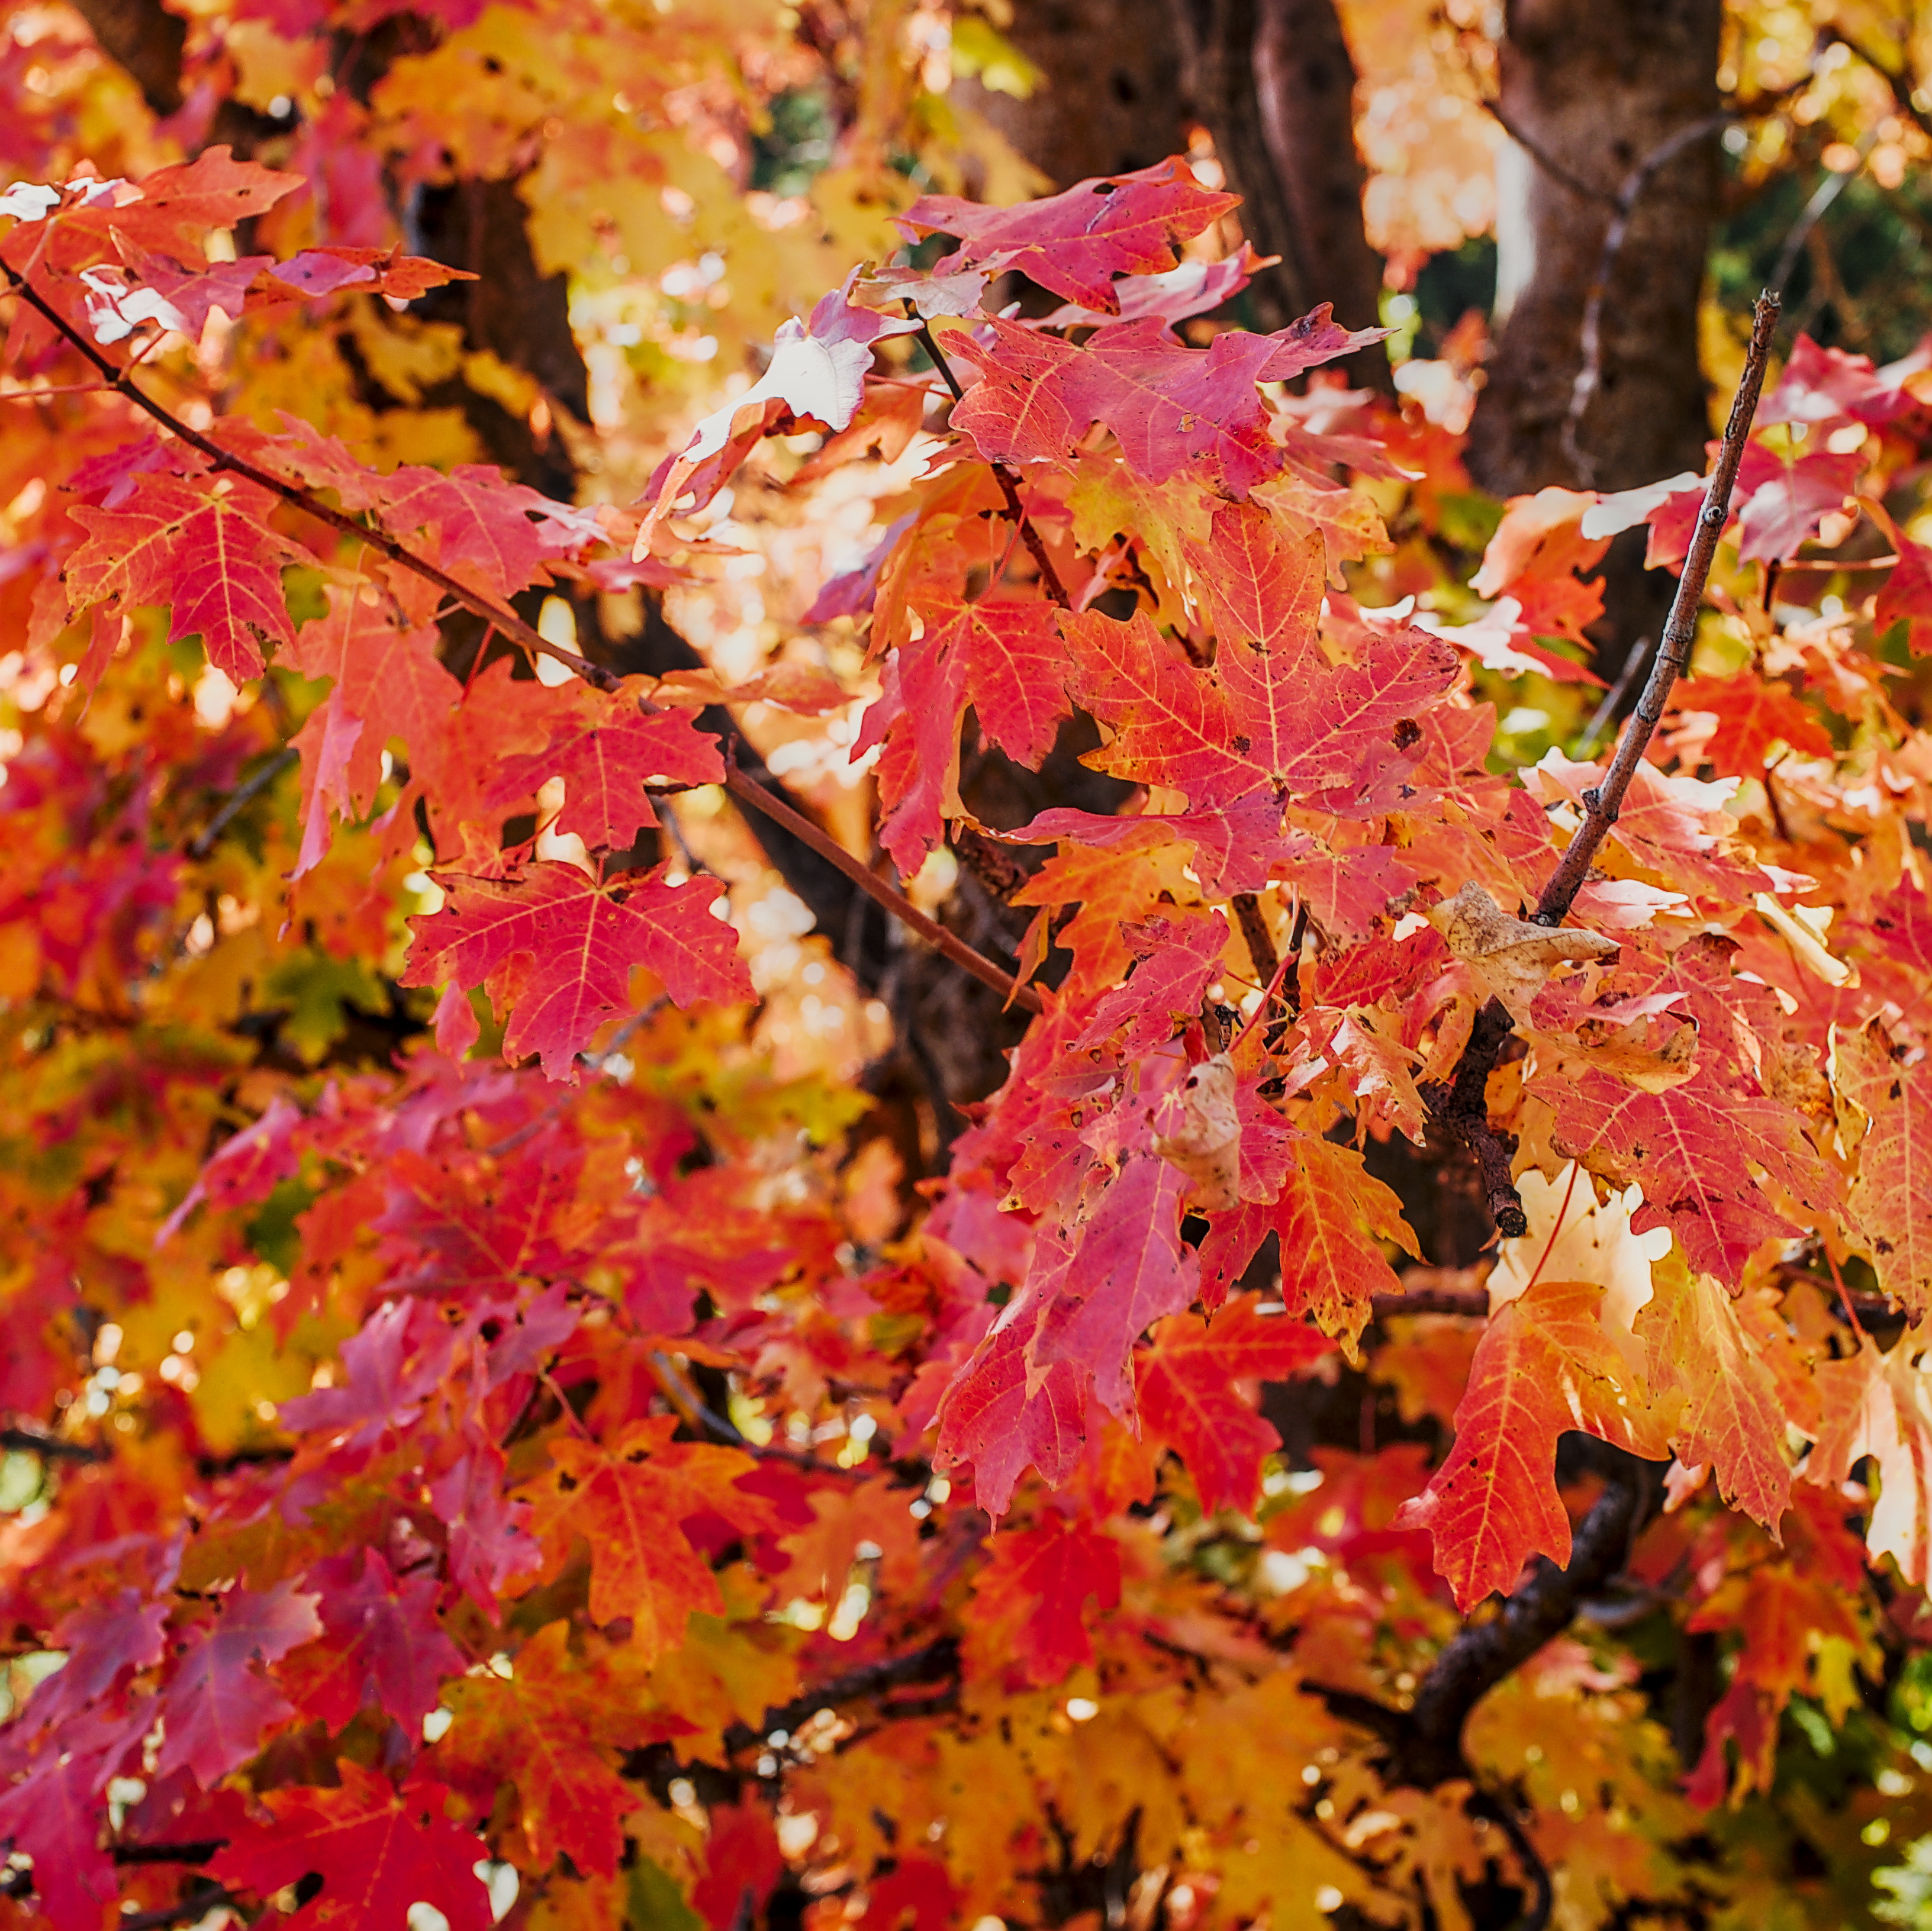 A closely-cropped photo of a vivid red and orange array of autumn maple leaves with a bit of sunlight and tree in the background.